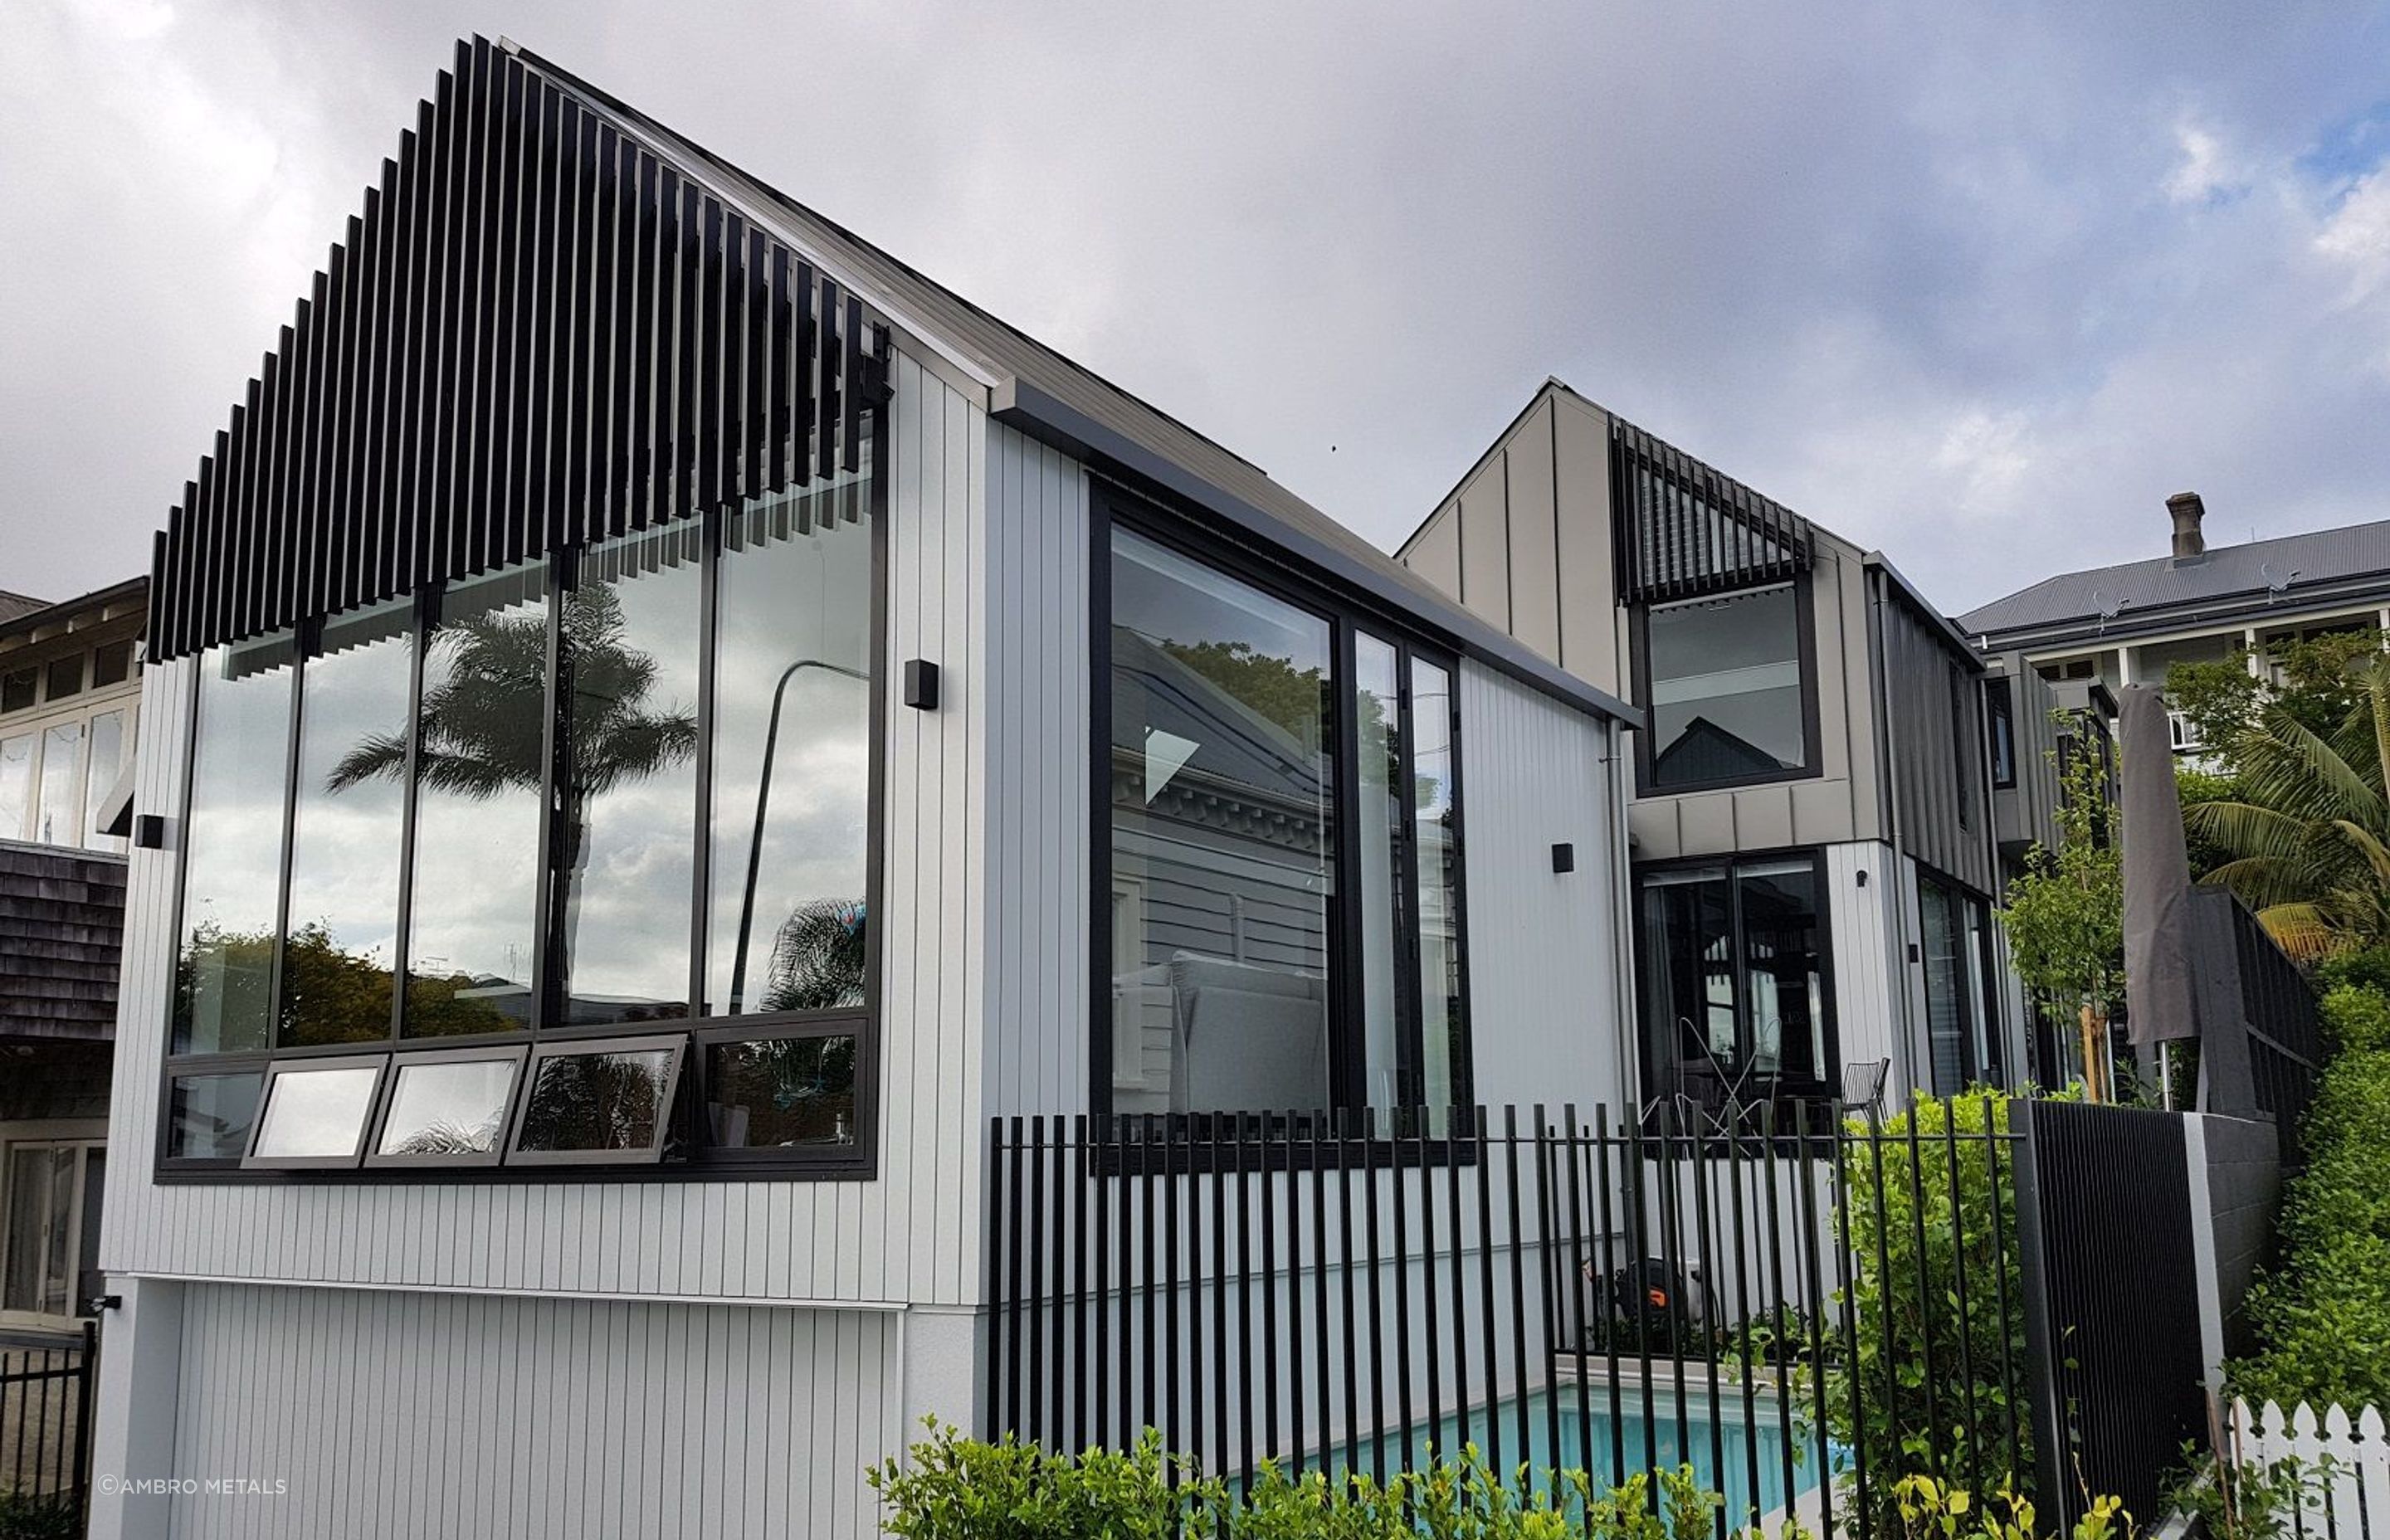 Aluminium roofs are great for designer-inspired homes thanks to their tremendous versatility, seen here with Euramax - Premium Coil Coated Aluminium.